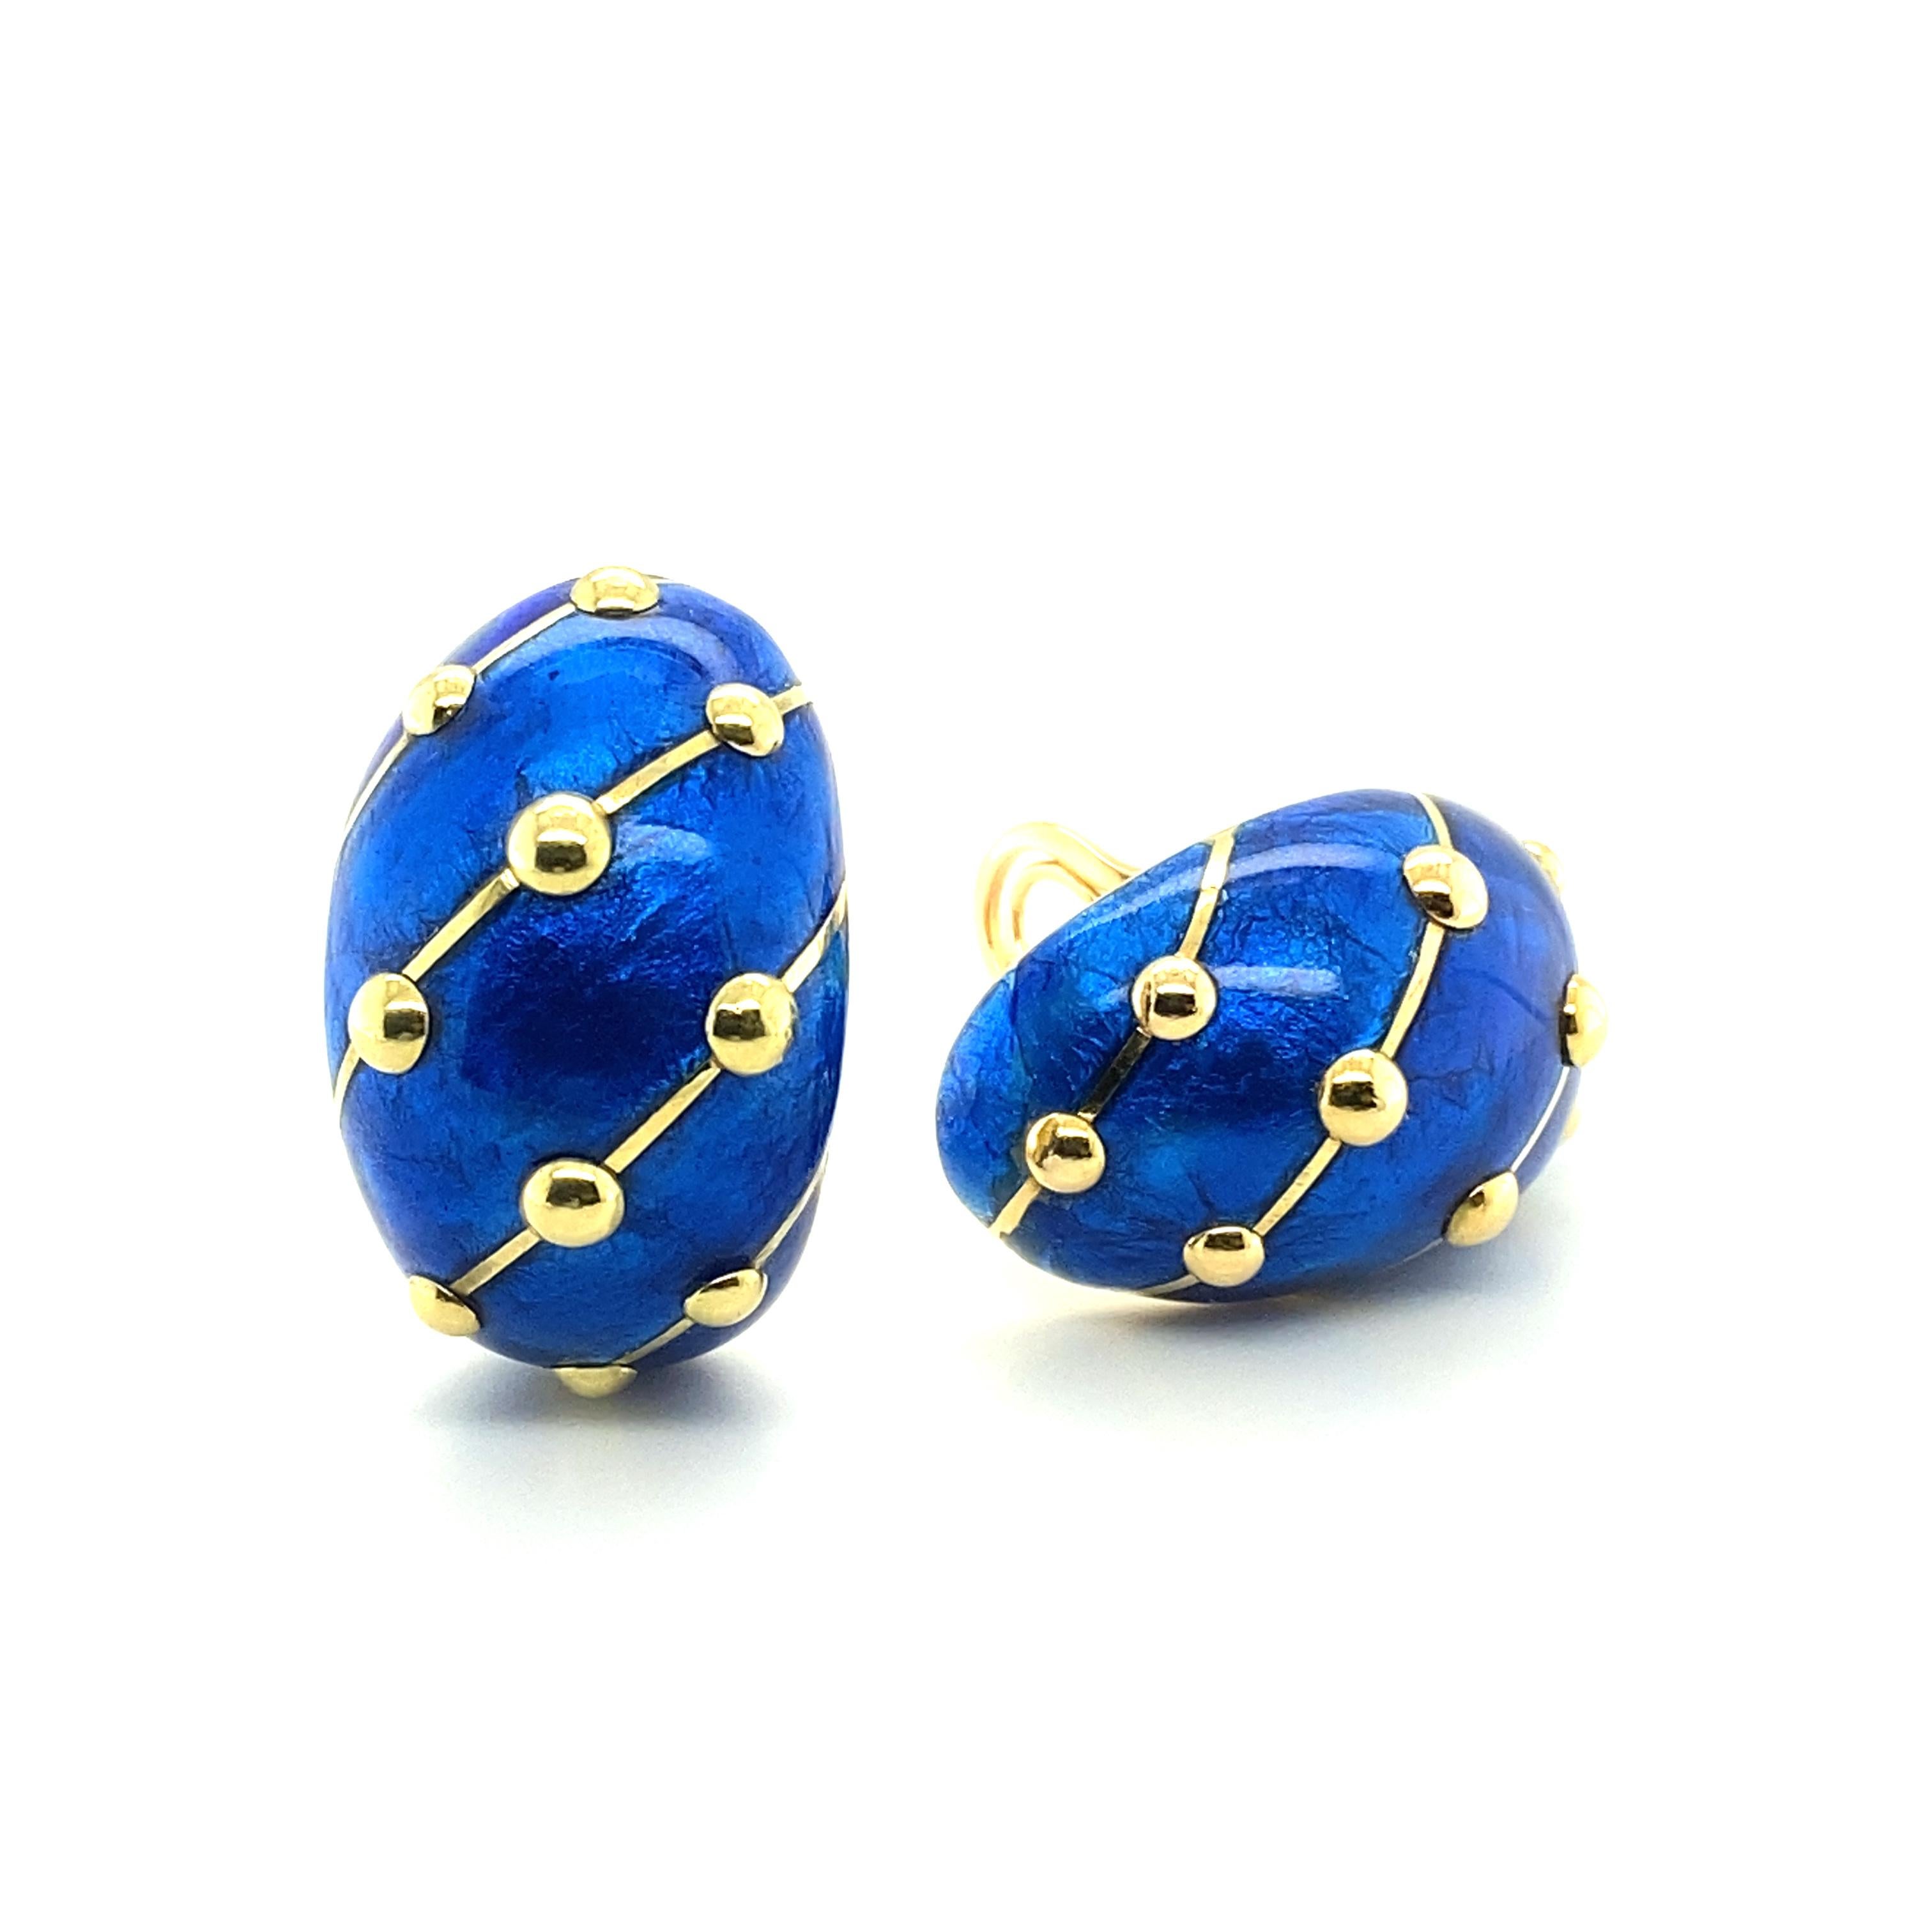 Pair of Gold and Blue Paillonné Enamel 'Banana' Earrings by Jean Schlumberger 2